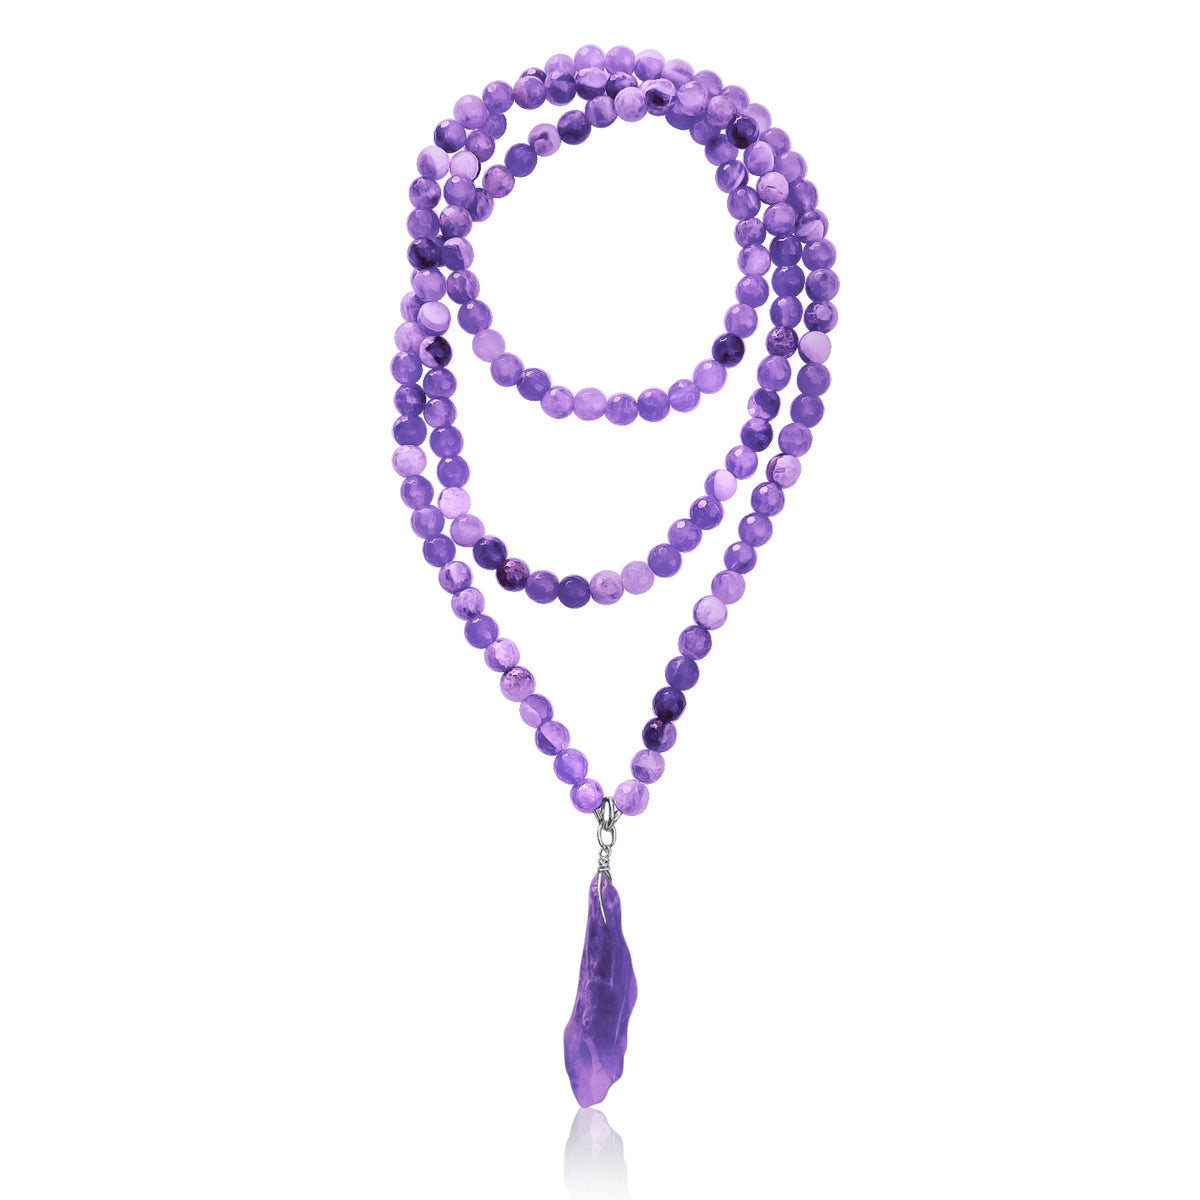 Anxiety Free - Rustic Amethyst Necklace to Help Make Good Decisions